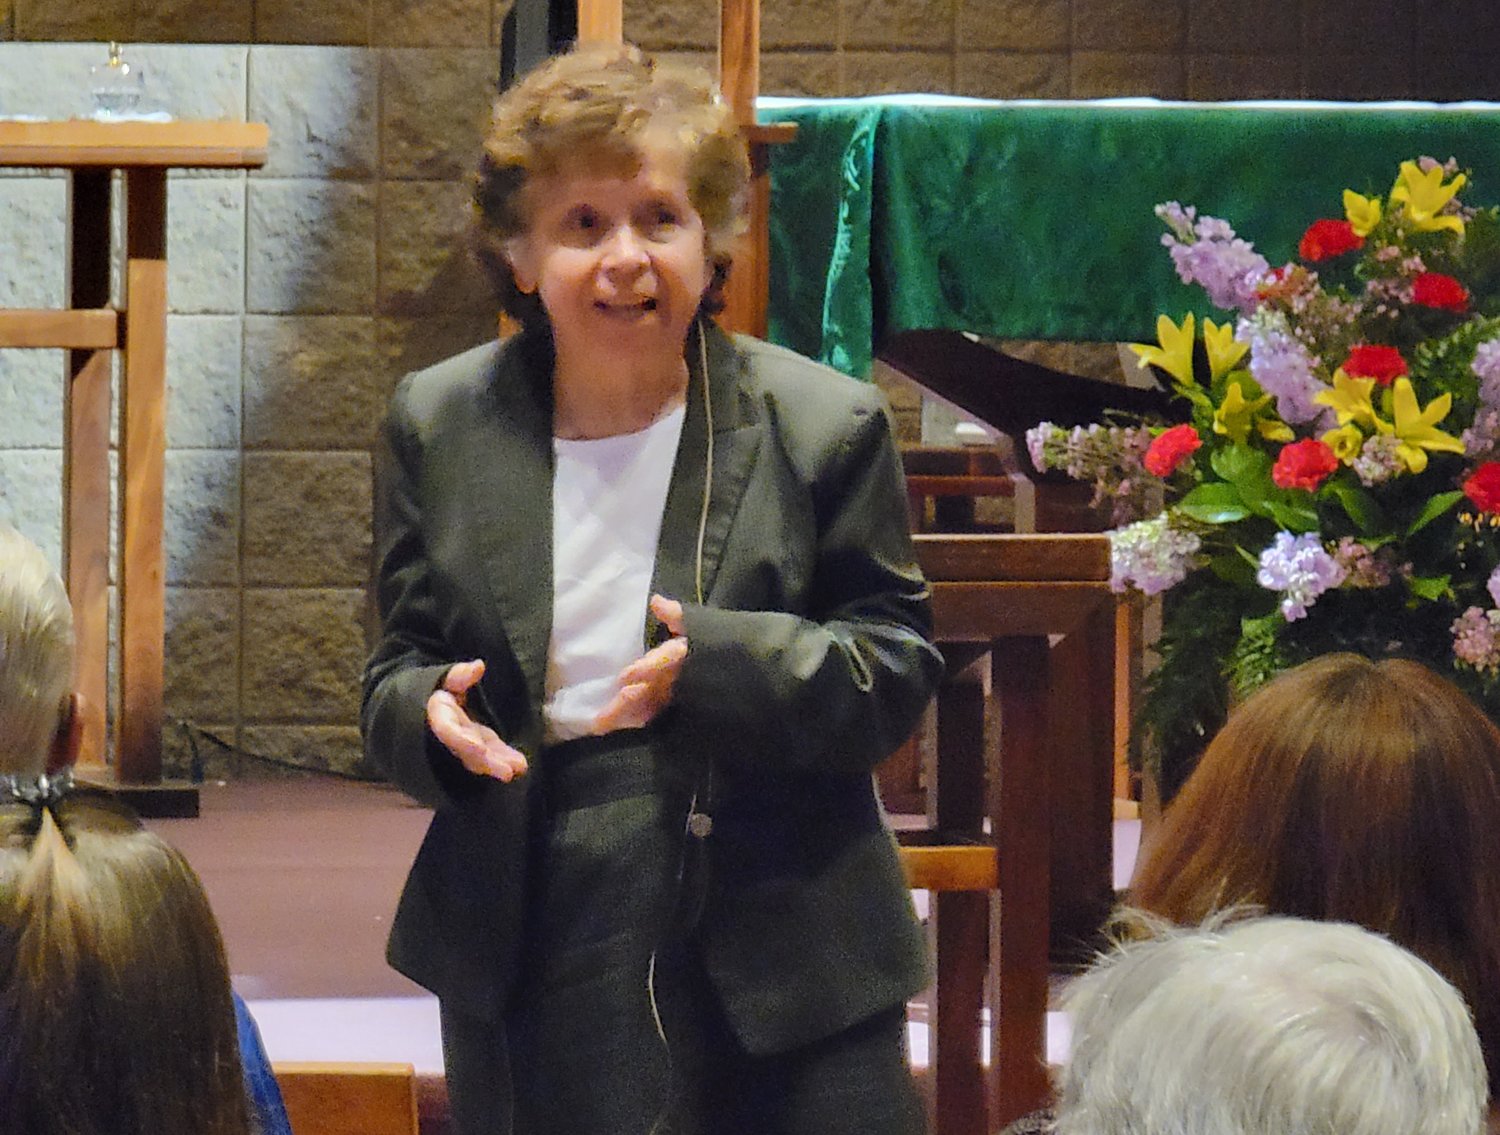 Marie Kenyon, director of the Office of Peace and Justice of the St. Louis archdiocese, gives a presentation on Catholic social teaching as the inaugural speaker for the Martha Trauth Social Justice Education Endowment’s annual speaker series on Sept. 15 in the St. Thomas More Newman Center Chapel in Columbia.